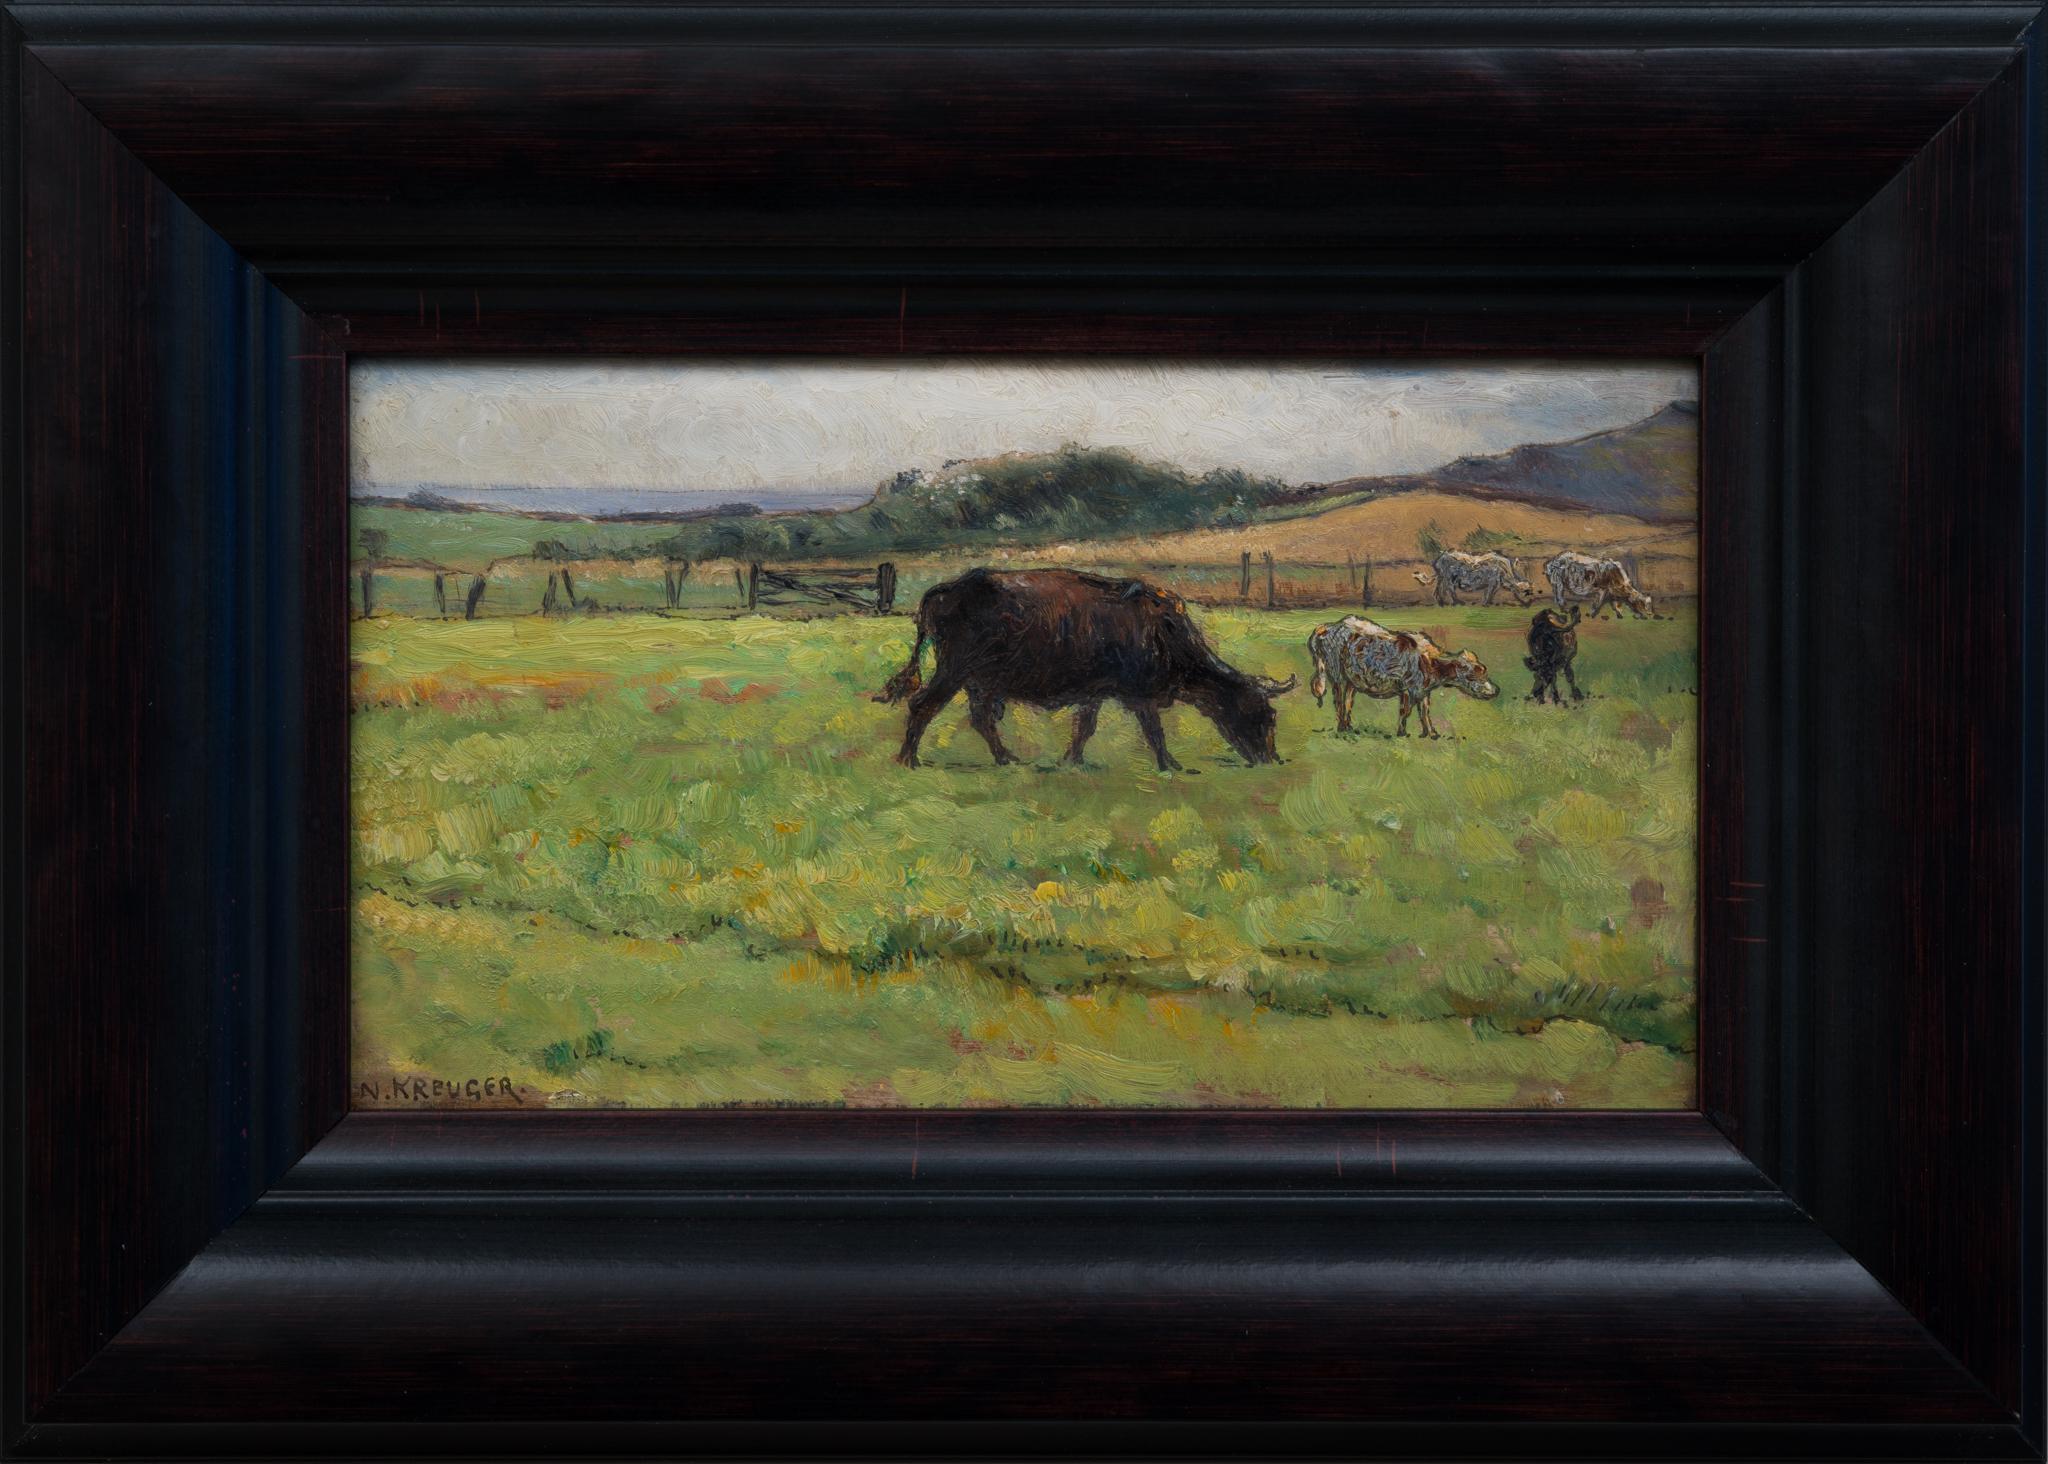 Cattle on the Meadow by Swedish Artist Nils Kreuger